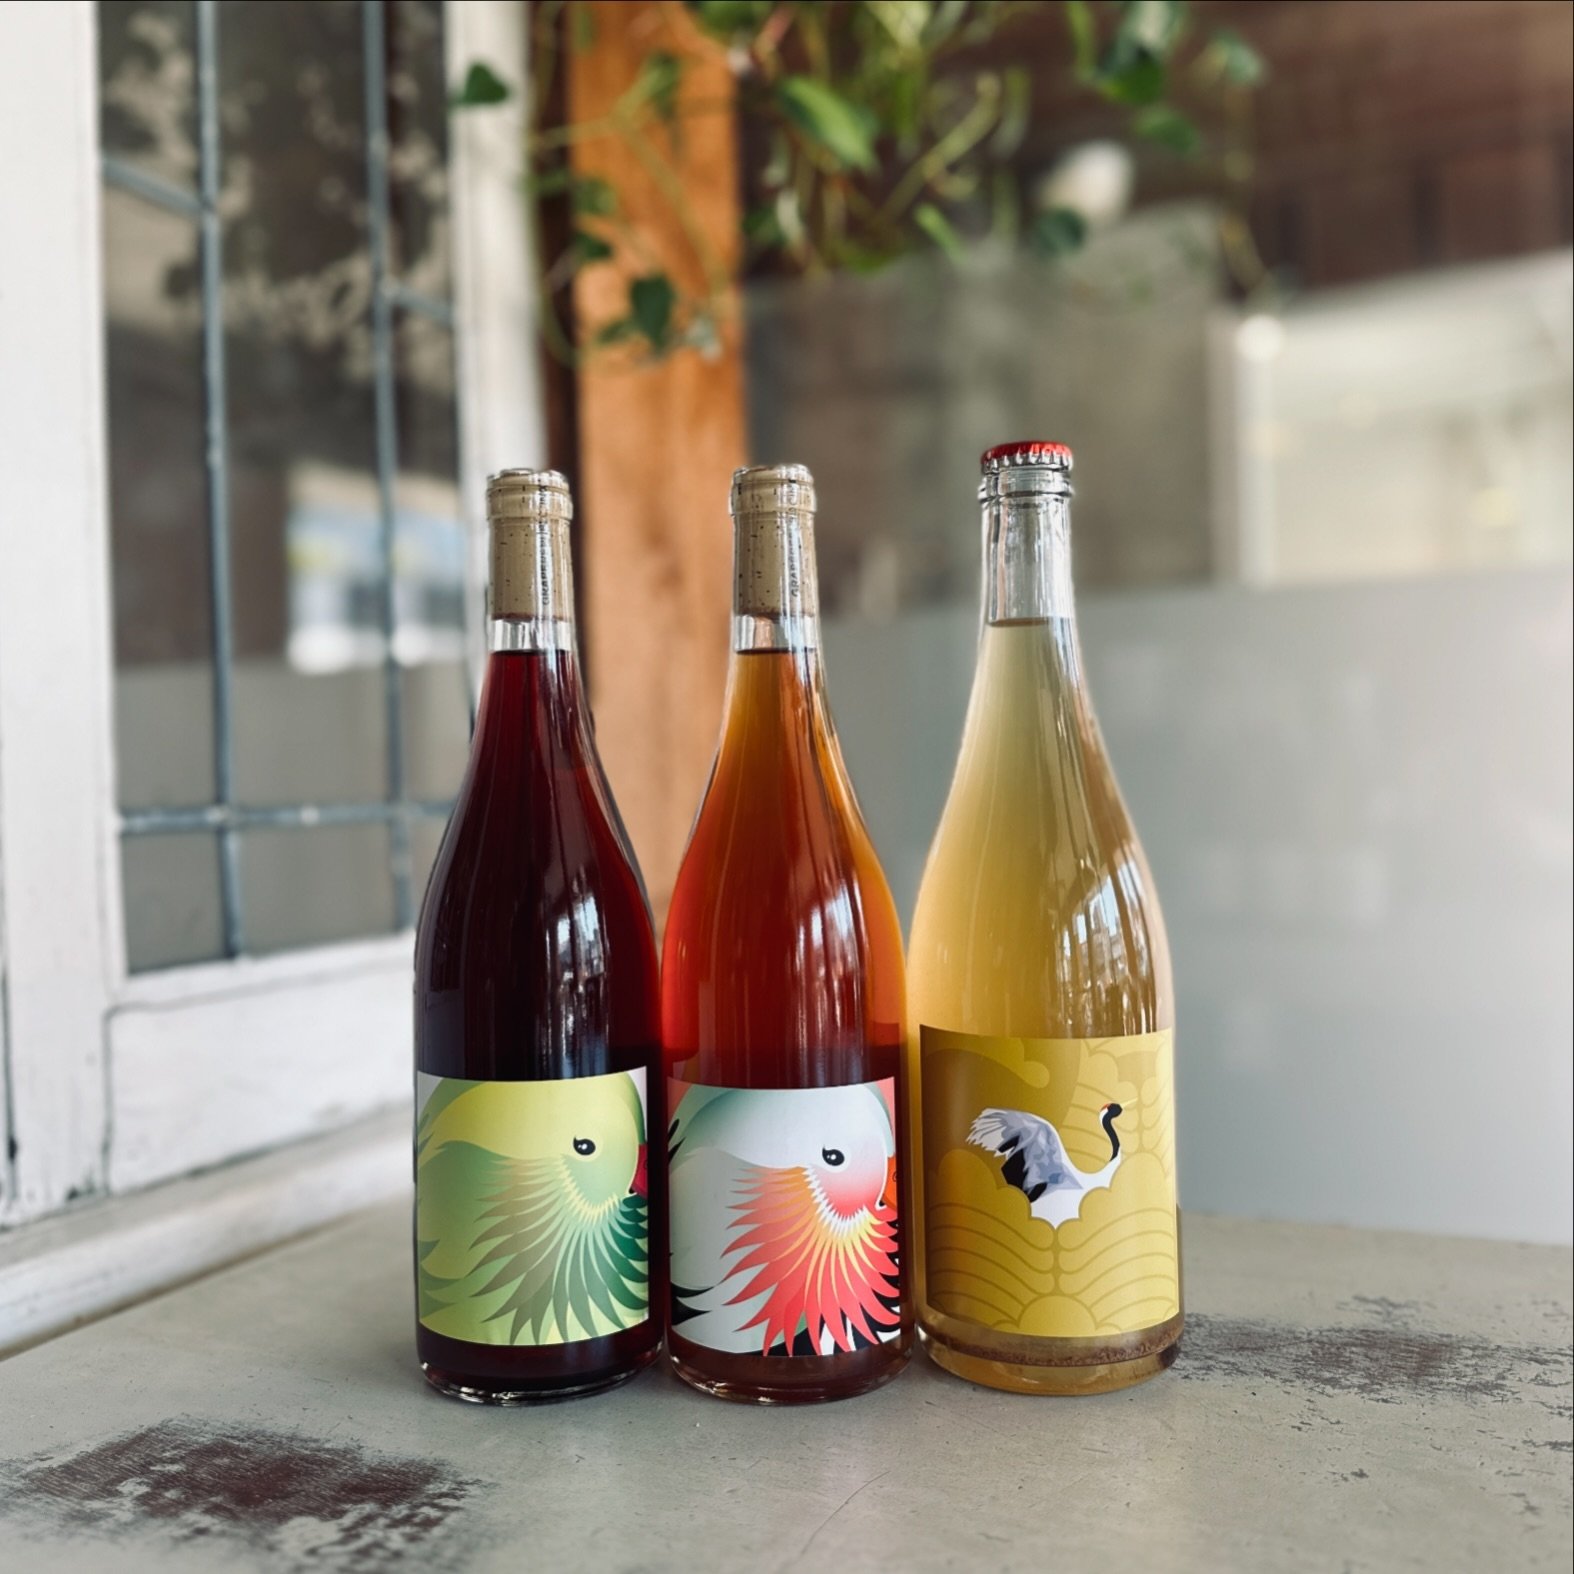 TONIGHT IN VANCOUVER: 
3 snacks + 3 Japanese wines at @thefarmersapprentice 
Hit them up for a reservation, you won&rsquo;t want to miss it. 
.
.
.
#juiceimports #vancouver #vancity #yvreats #graperepublic #japanesewine #naturalwine #yamagata #nanyo 